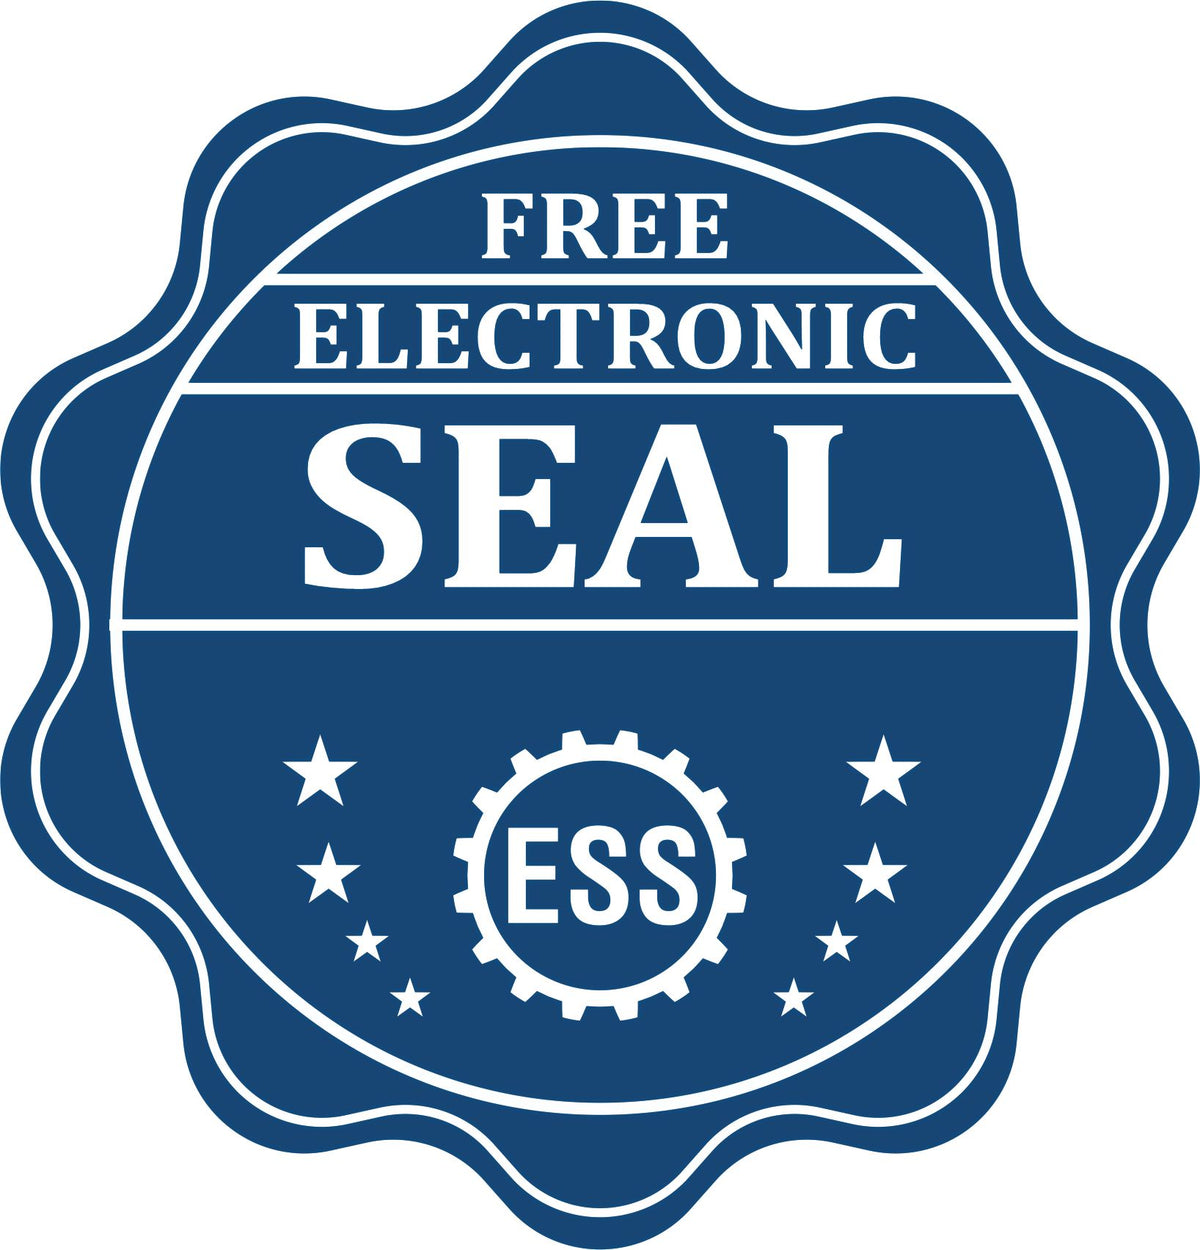 A badge showing a free electronic seal for the Slim Pre-Inked Georgia Architect Seal Stamp with stars and the ESS gear on the emblem.